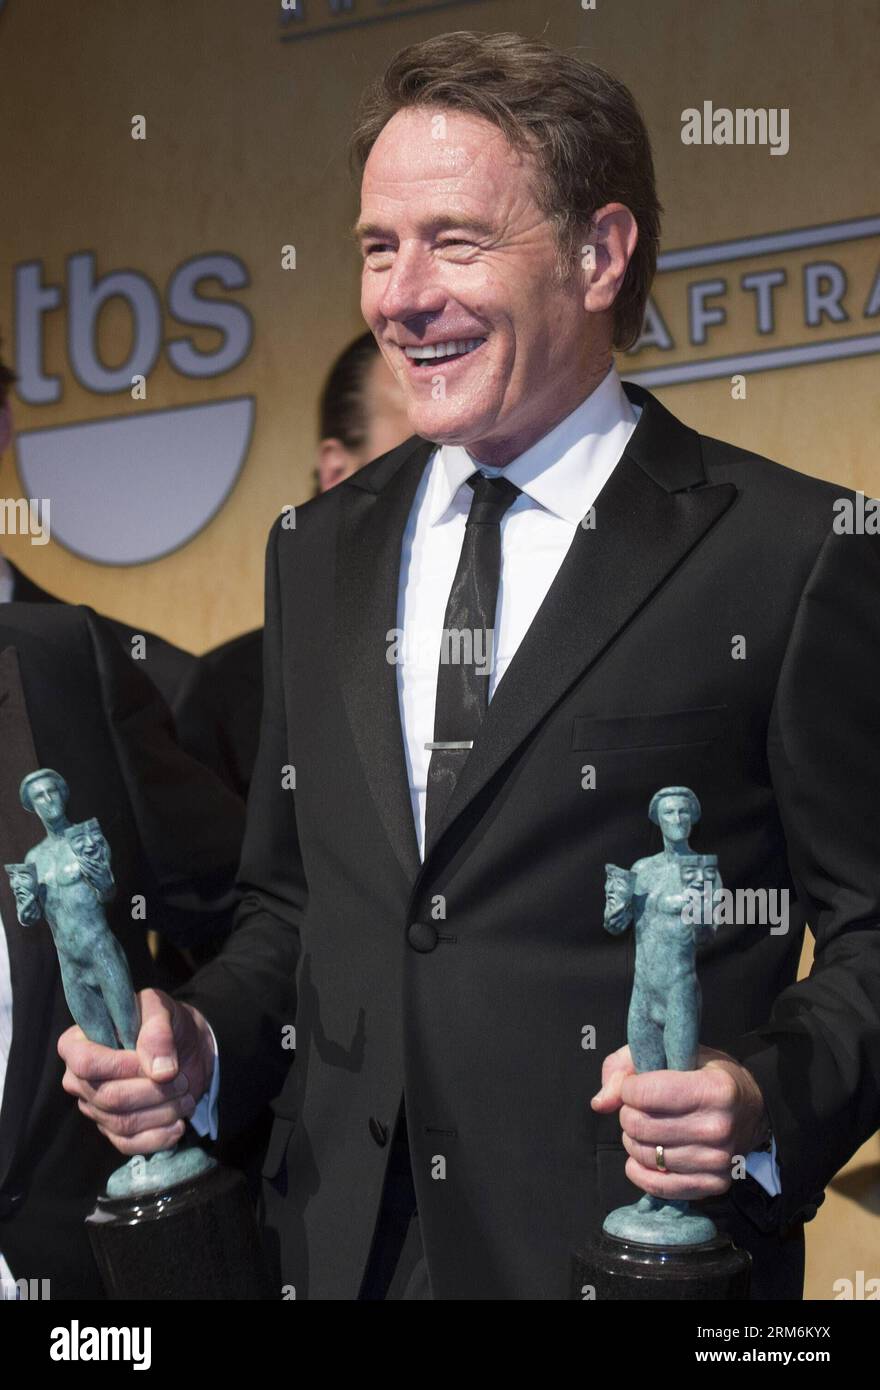 Bryan Cranston, winner of the Outstanding Performance By An Ensemble In A Drama Series award for Breaking Bad , poses in the press room during the 20th Annual Screen Actors Guild Awards, at the Shrine Auditorium in Los Angeles, California, the United States, Jan. 18, 2014. (Xinhua/Yang Lei)(ctt) U.S.-LOS ANGELES-SAG AWARDS PUBLICATIONxNOTxINxCHN   Bryan Cranston Winner of The Outstanding Performance by to Ensemble in a Drama Series Award for Breaking Bath Poses in The Press Room during The 20th Annual Screen Actors Guild Awards AT The Shrine Auditorium in Los Angeles California The United Stat Stock Photo